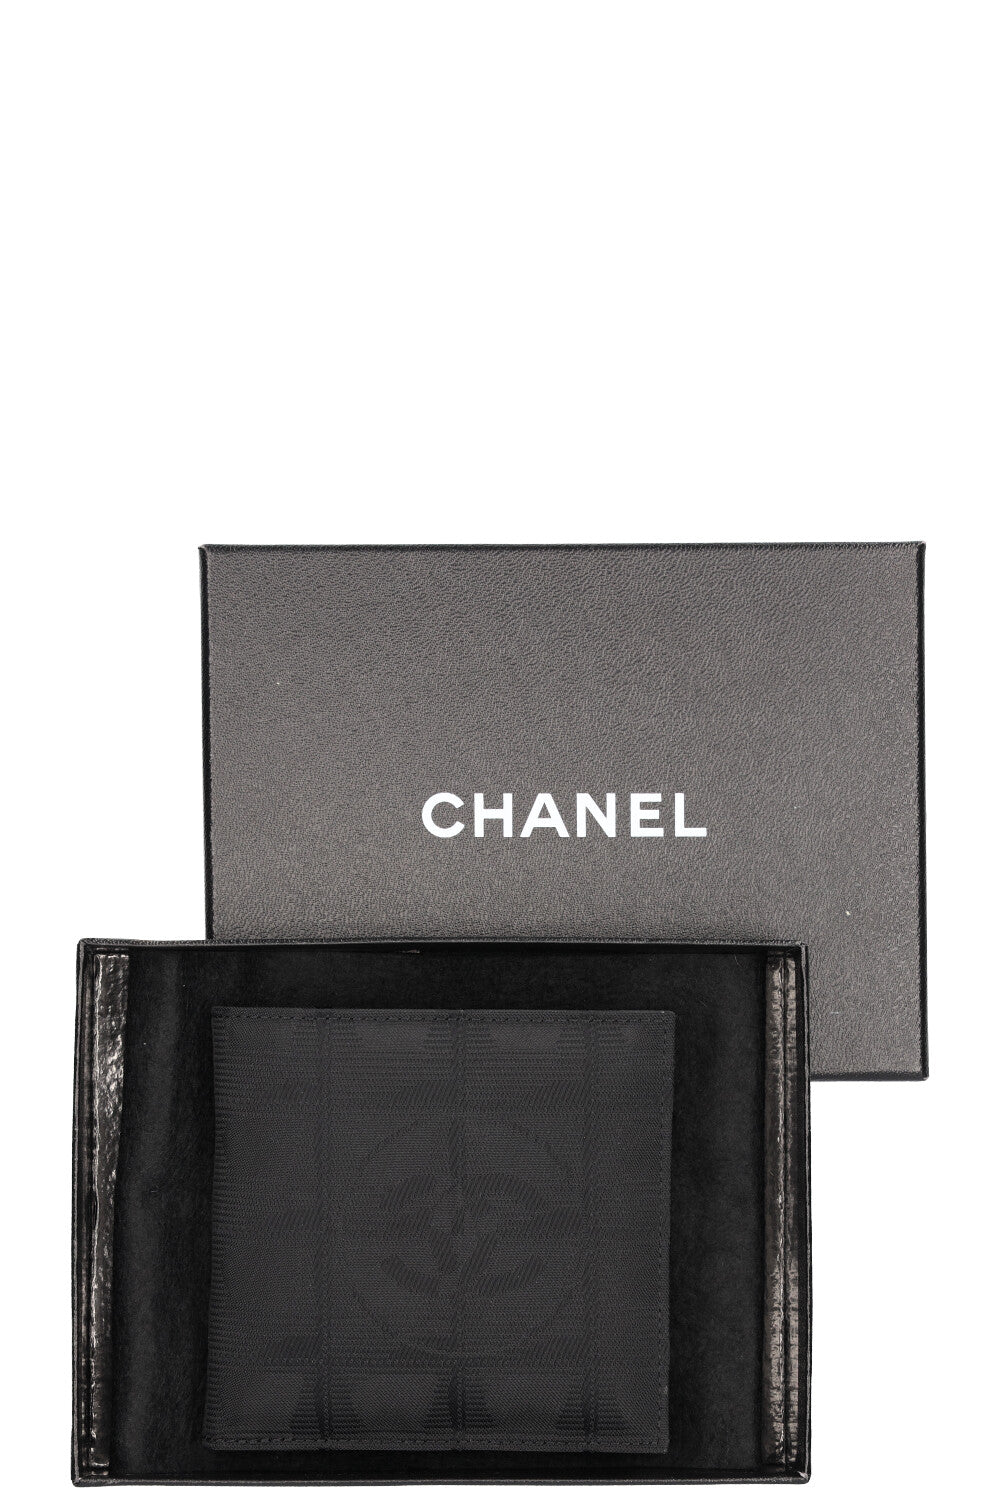 CHANEL Travel Line Wallet